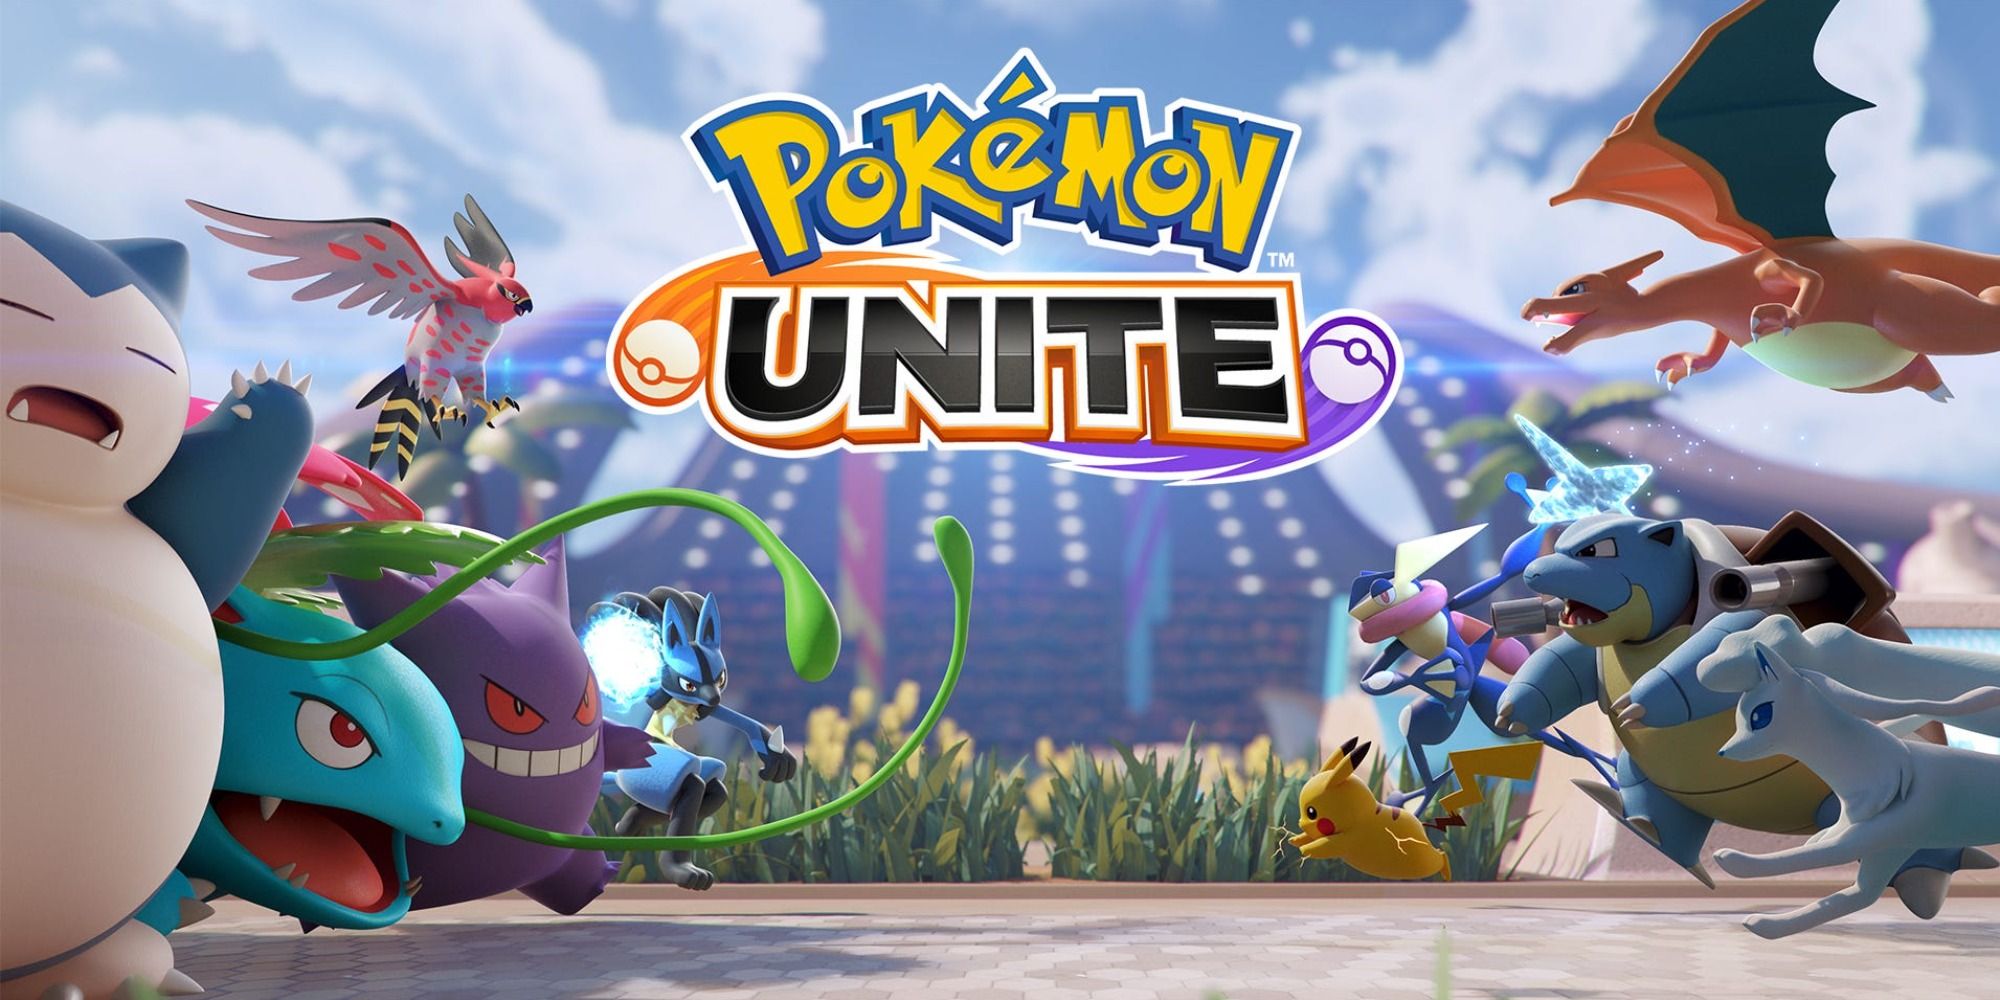 pokemon unite characters teaming up against each other